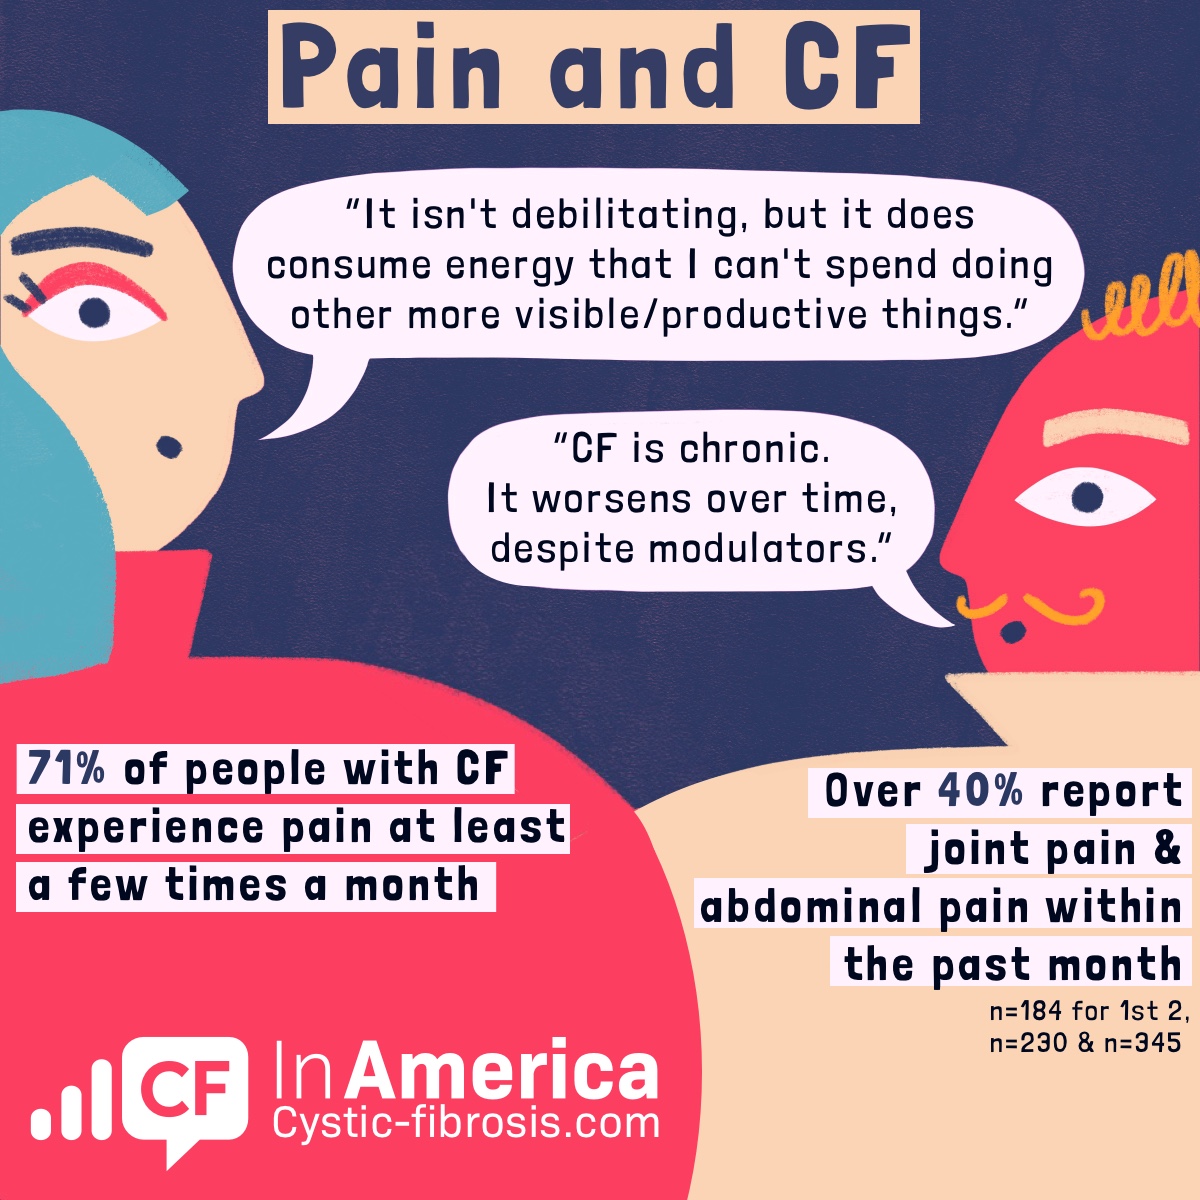 Pain and CF “It isn't debilitating, but it does consume energy that I can't spend doing other more visible/productive things.”“CF is chronic. It worsens over time, despite modulators.” 71% of people with CF experience pain at least a few times a month, Over 40% report joint pain & abdominal pain within the past month